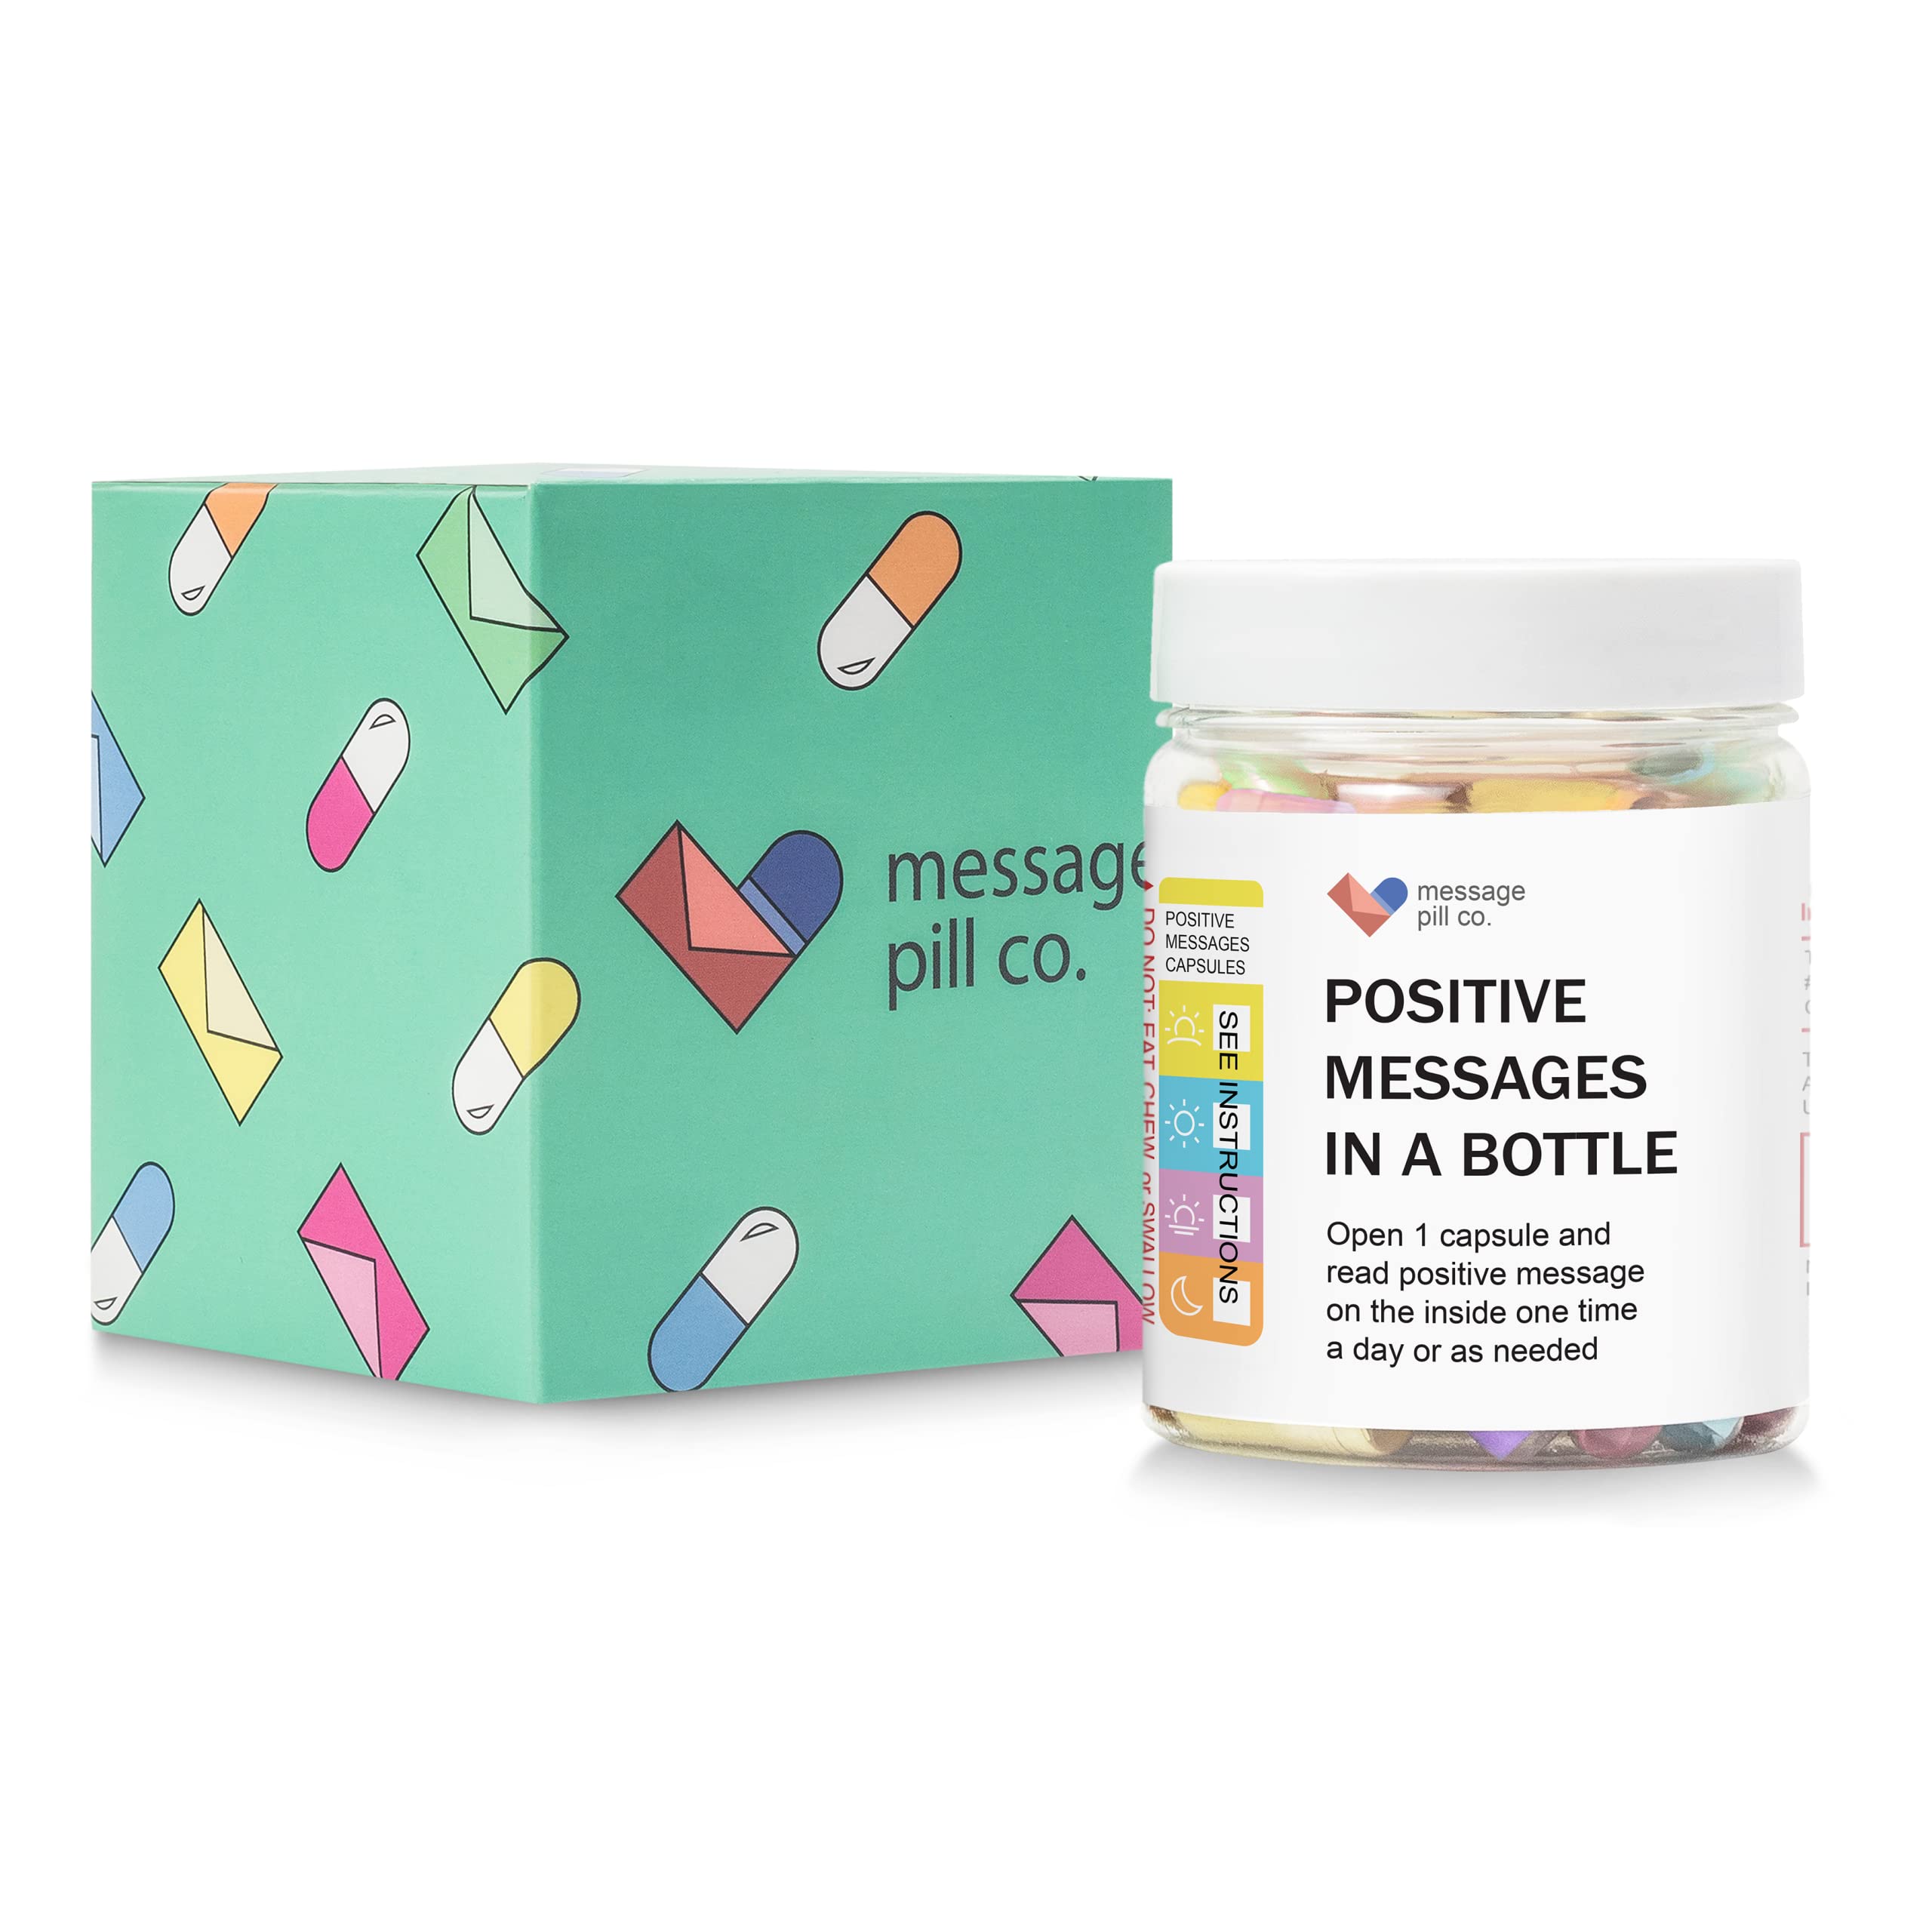 MESSAGE PILL CO. Self Care Gifts - 50 Positive Affirmations Get Well Soon Gifts for Women and Men Stress Relief. Self Care Kit with Daily Messages for Meditation, Mindfulness & Relaxation